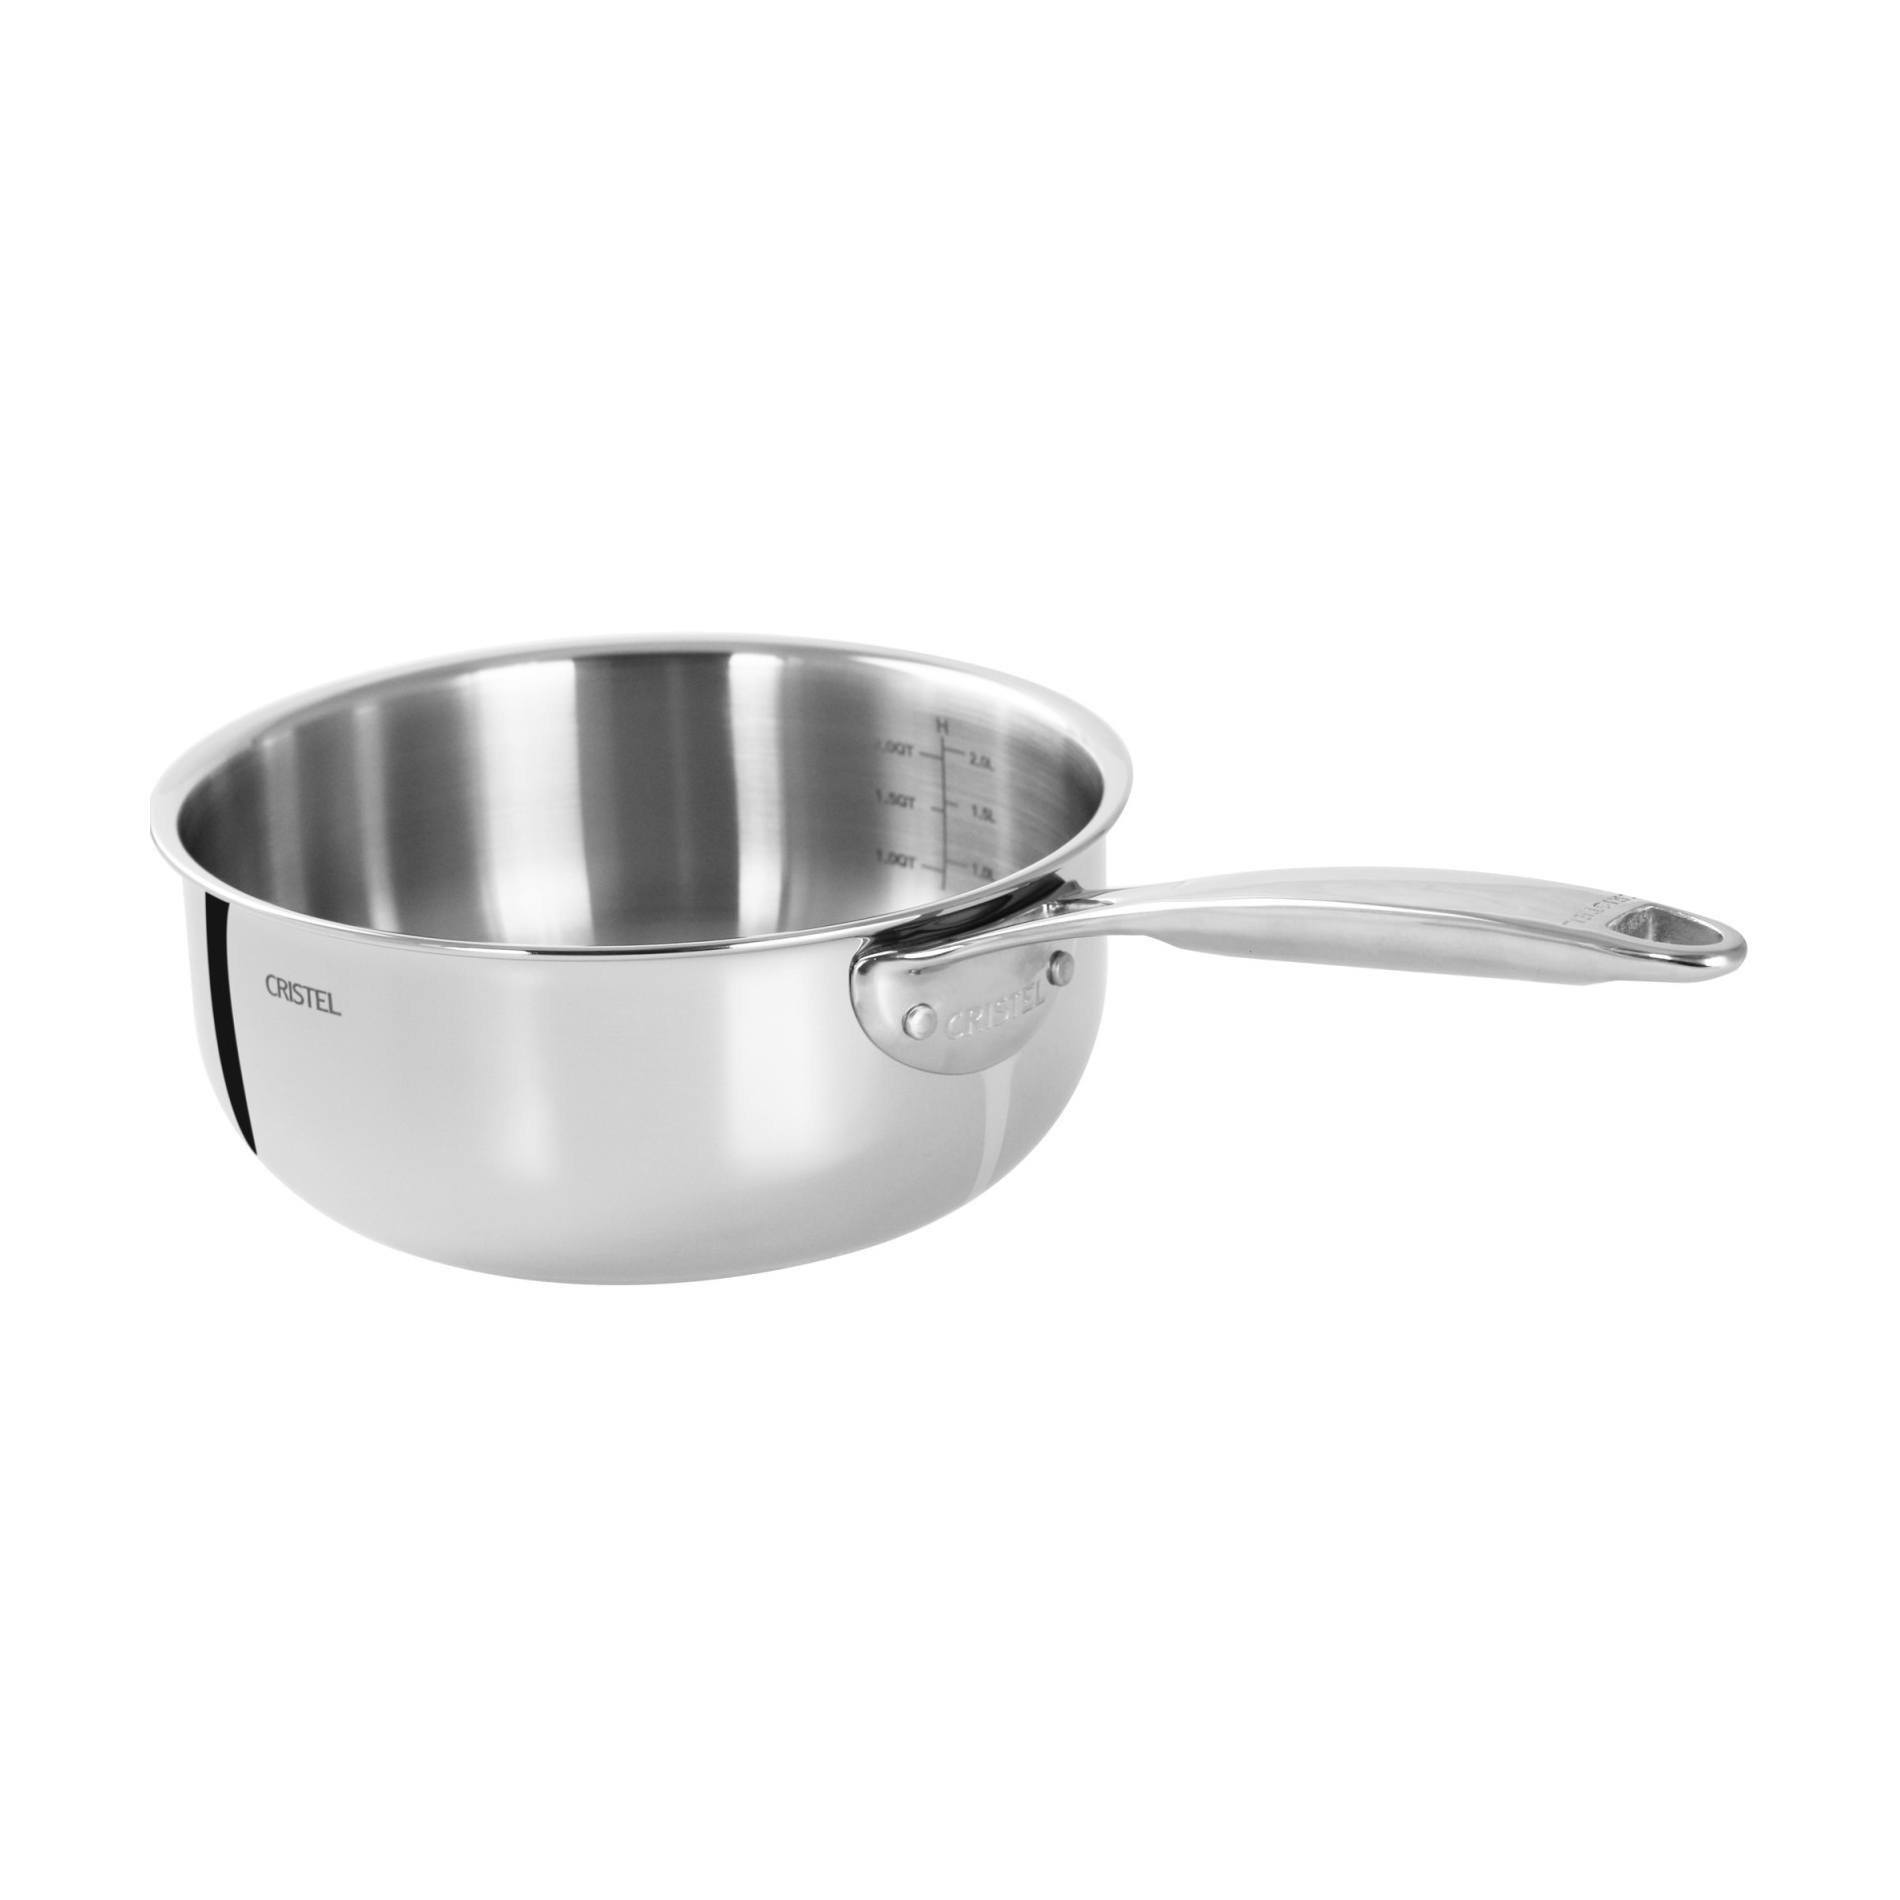 Castel Pro sauté pan with fixed handle 20 cm stainless steel Cristel